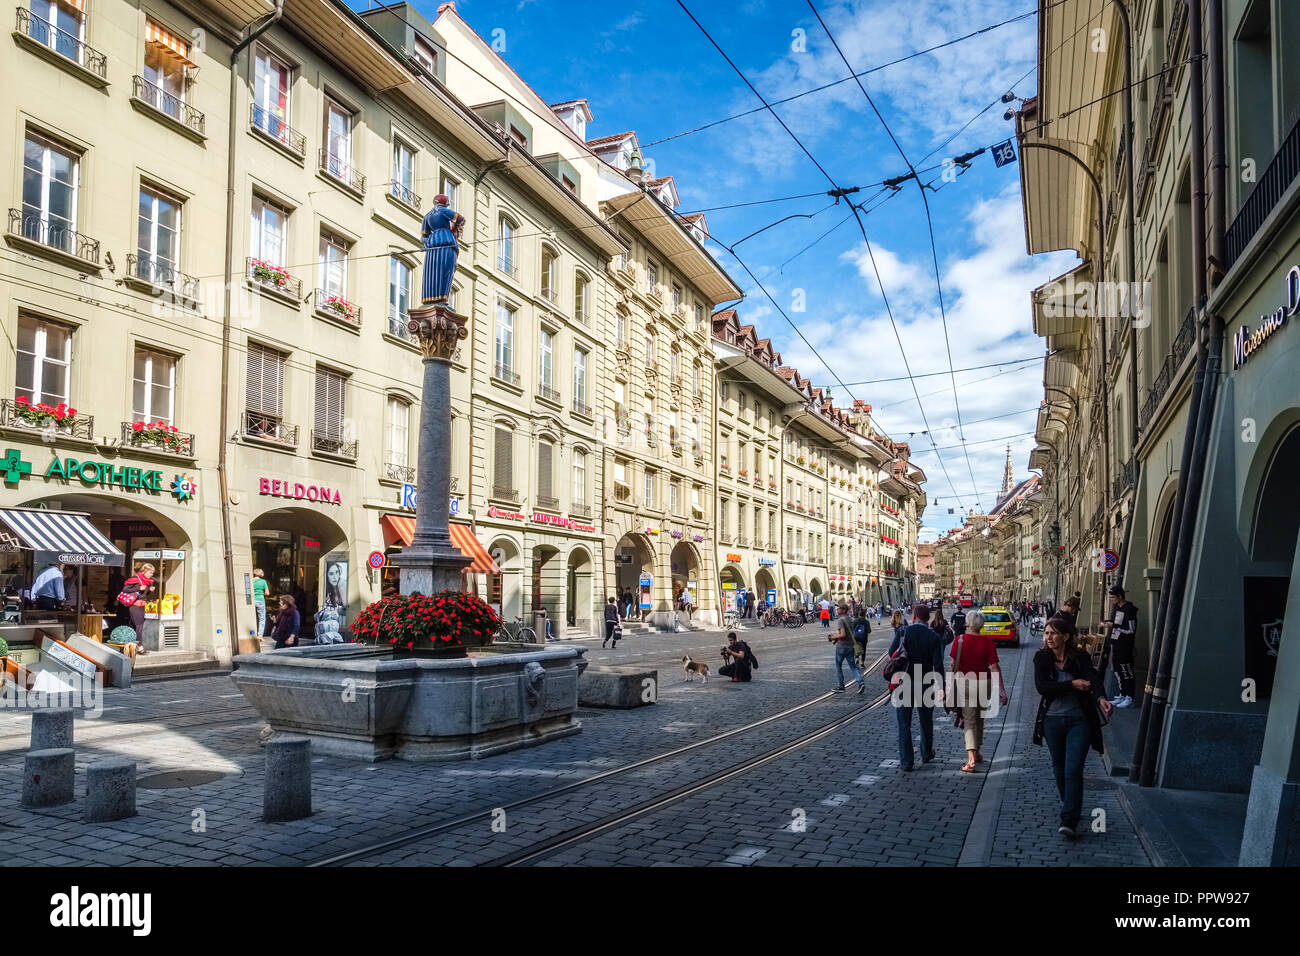 Bern, Switzerland - September 16, 2015: Photo taken in the Marktgasse in Bern, one of the principal streets in the Old City of Bern Stock Photo